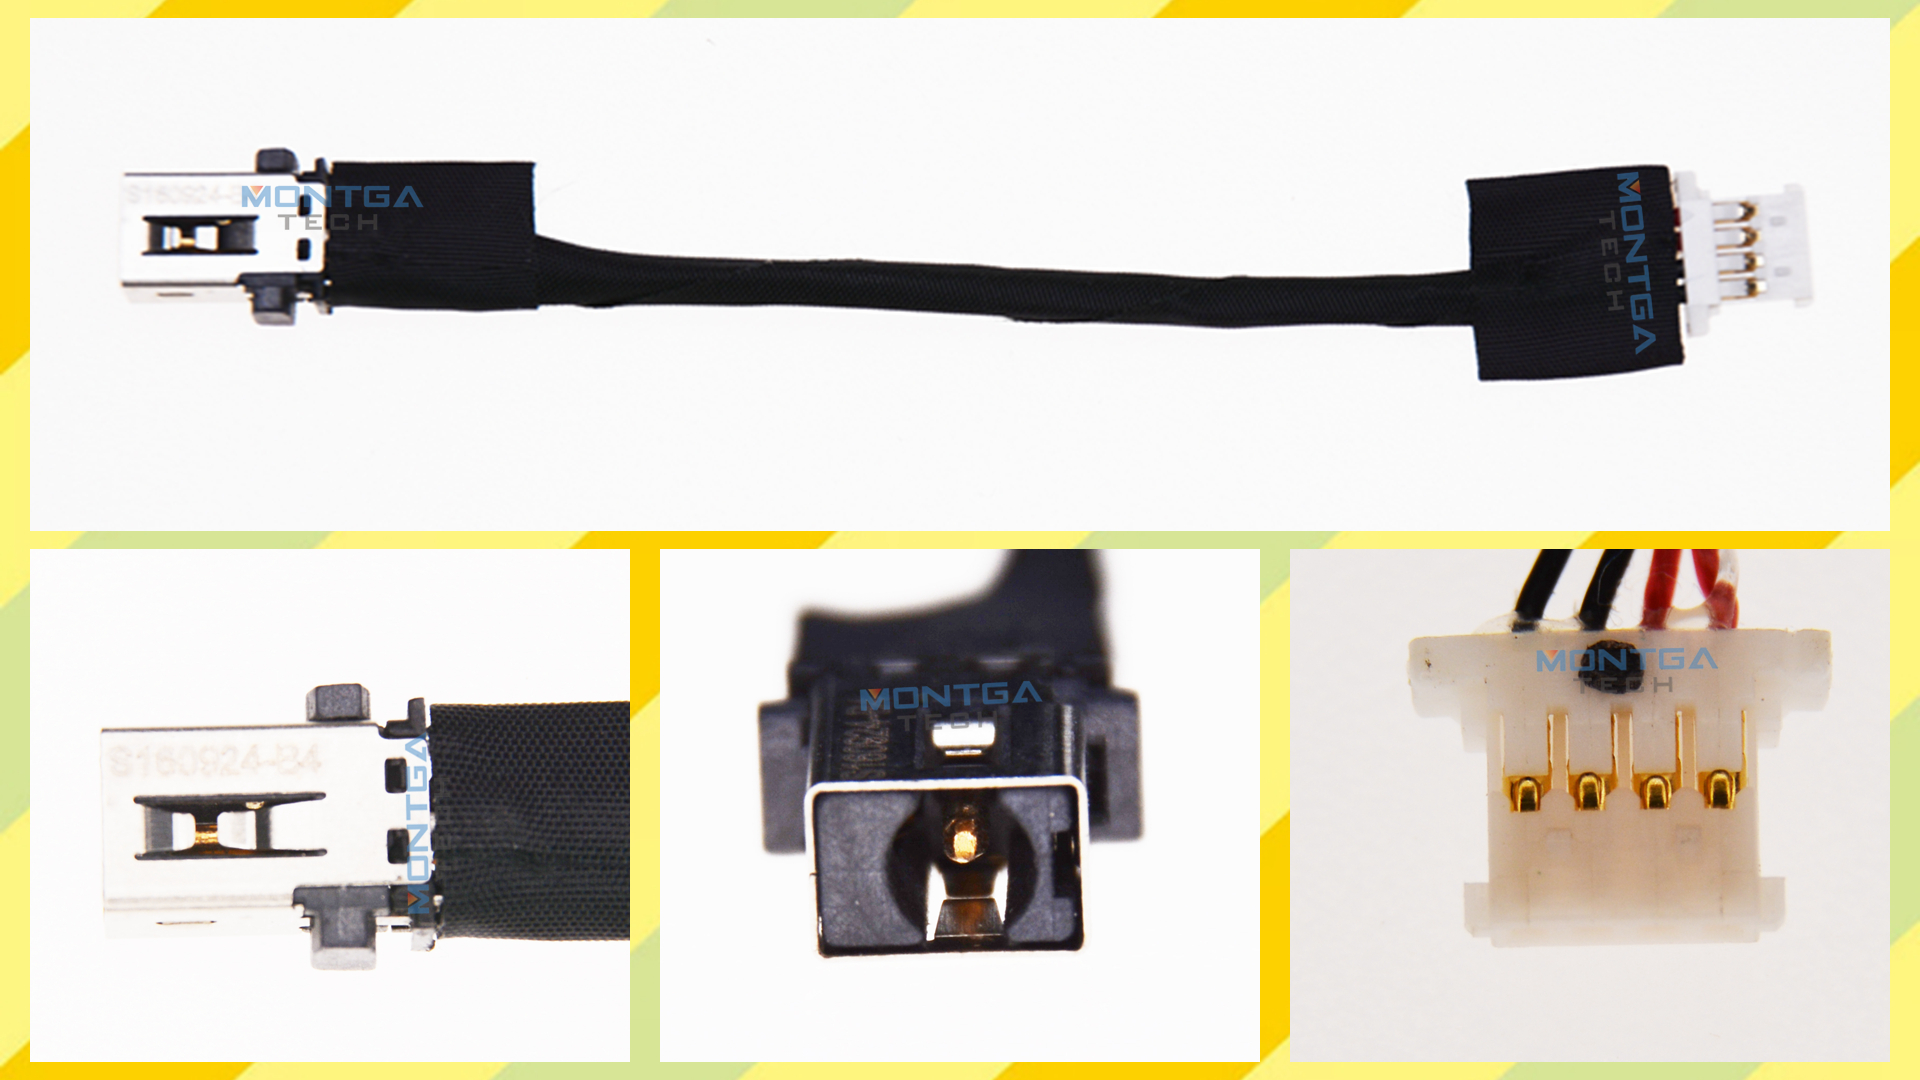 Acer SF113-31 charging connector, Acer SF113-31 DC Power Jack, Acer SF113-31 DC IN Cable, Acer SF113-31 Power Jack, Acer SF113-31 plug, Acer SF113-31 Jack socket, Acer SF113-31 connecteur de charge, 